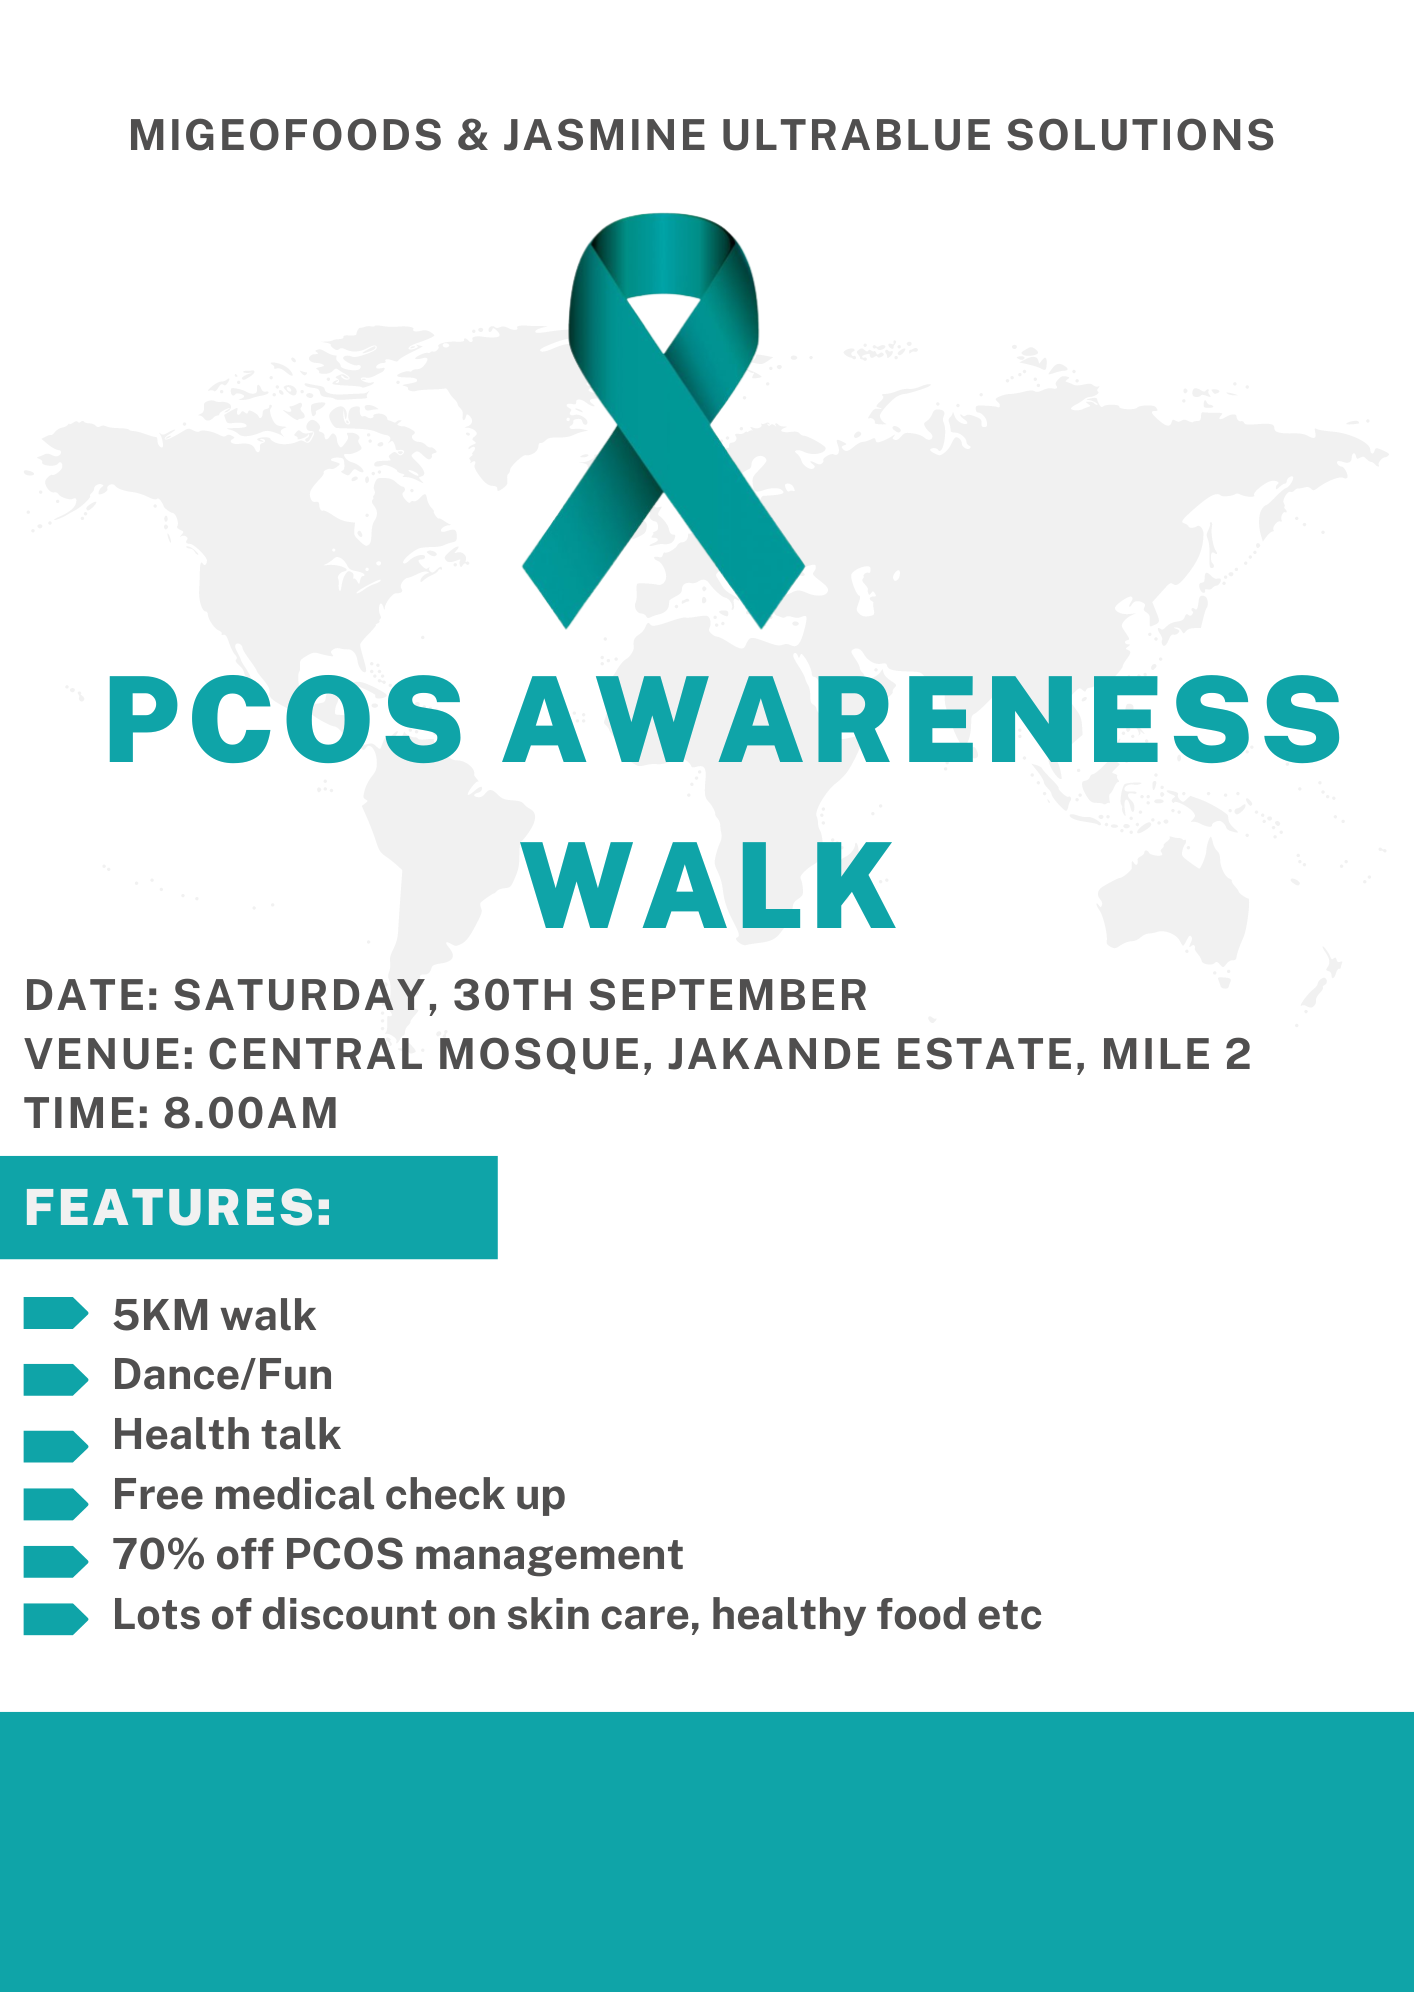 PCOS AWARENESS WALK Post free event in Nigeria using tickethub.ng, buy and sell tickets to event